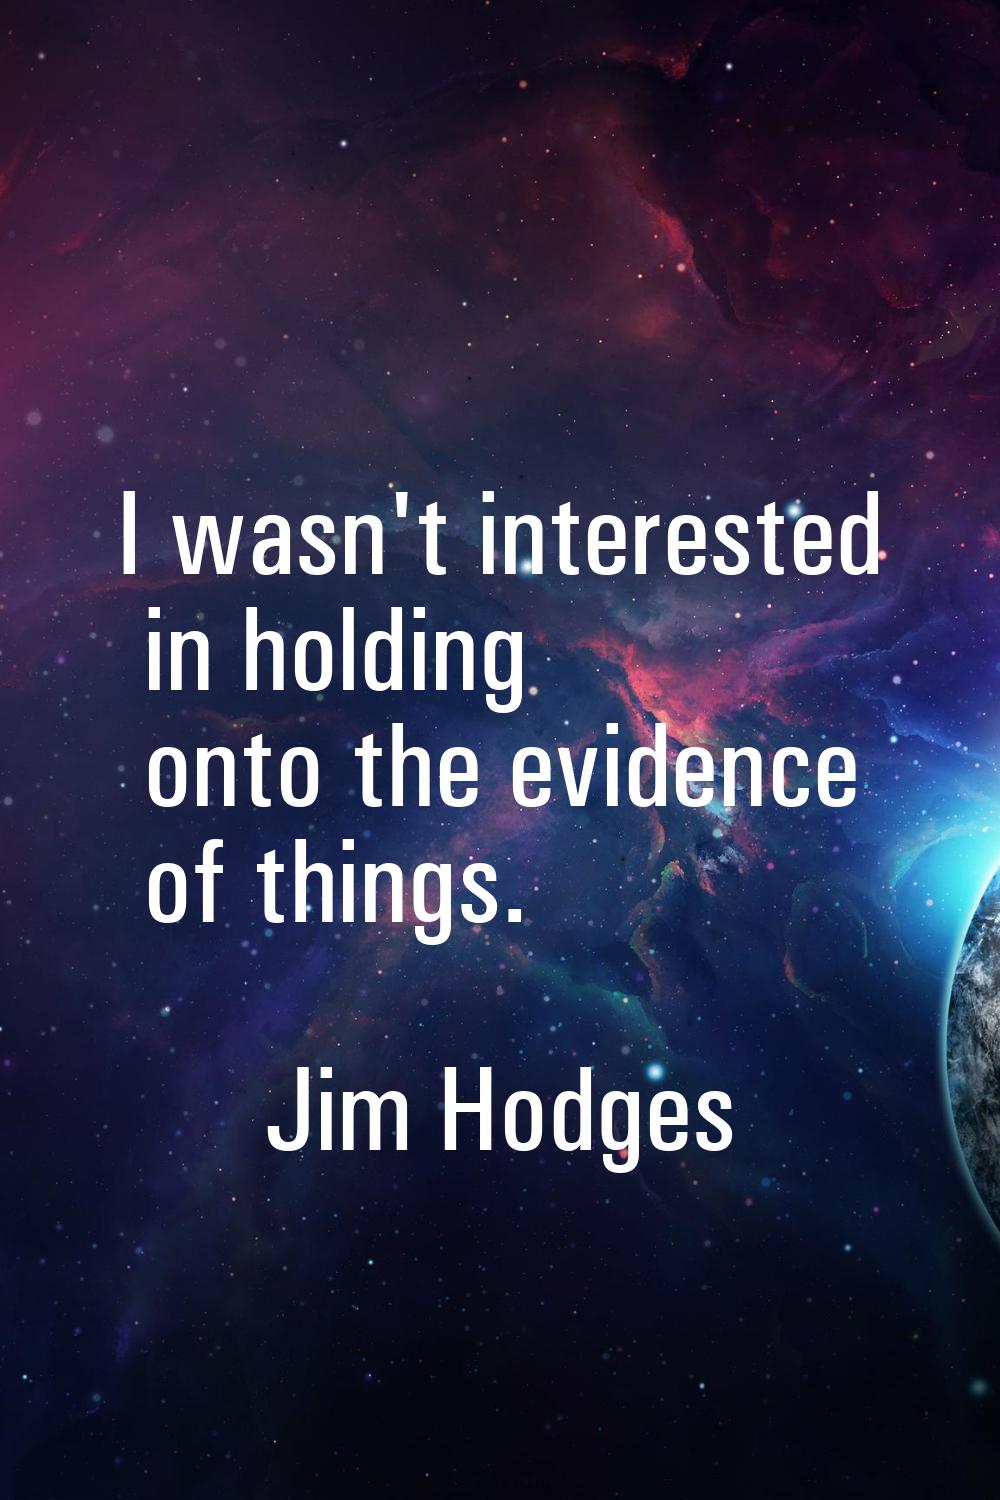 I wasn't interested in holding onto the evidence of things.